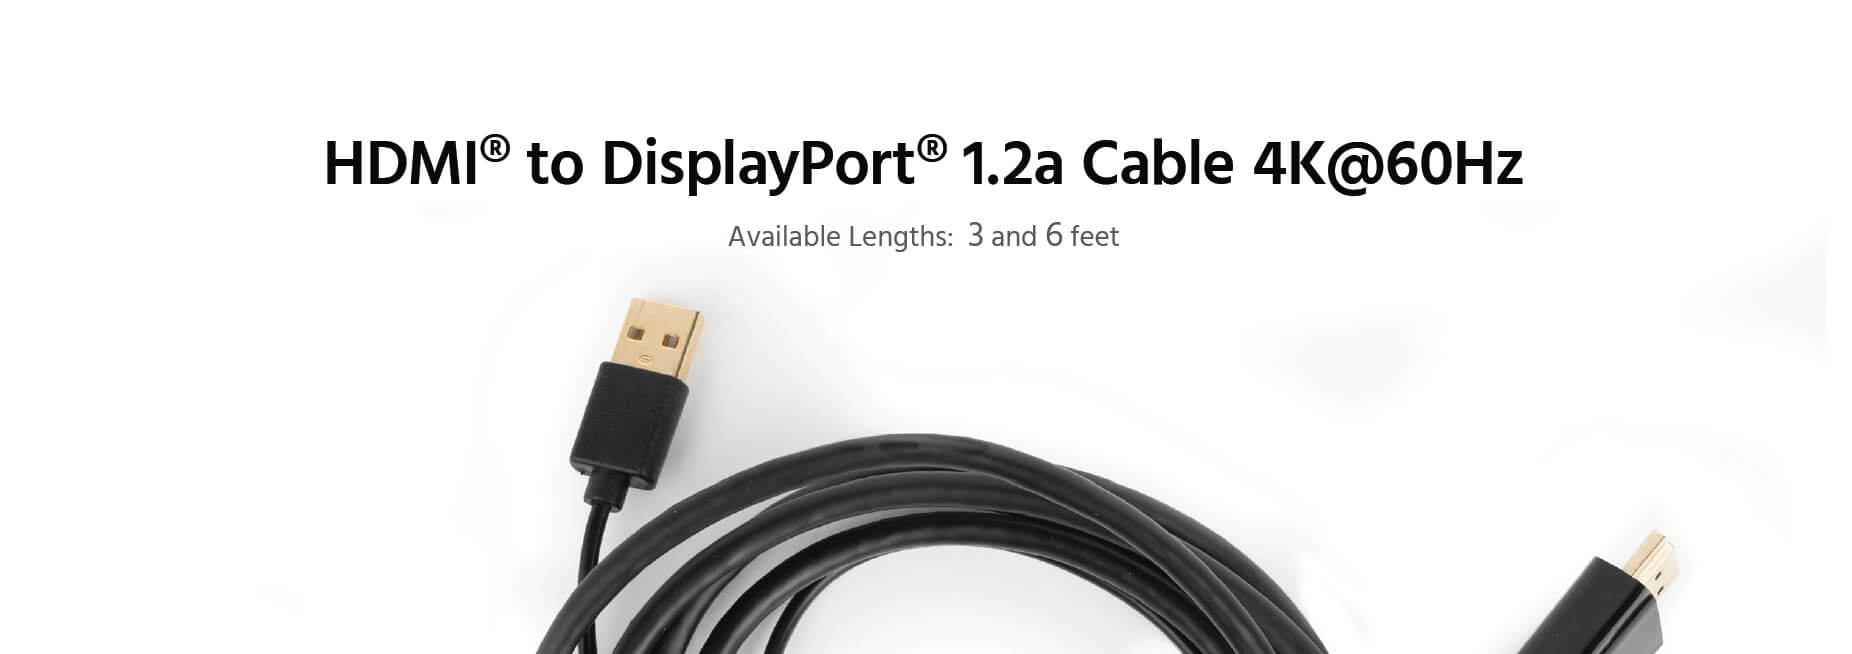 HDMI to DisplayPort Cable